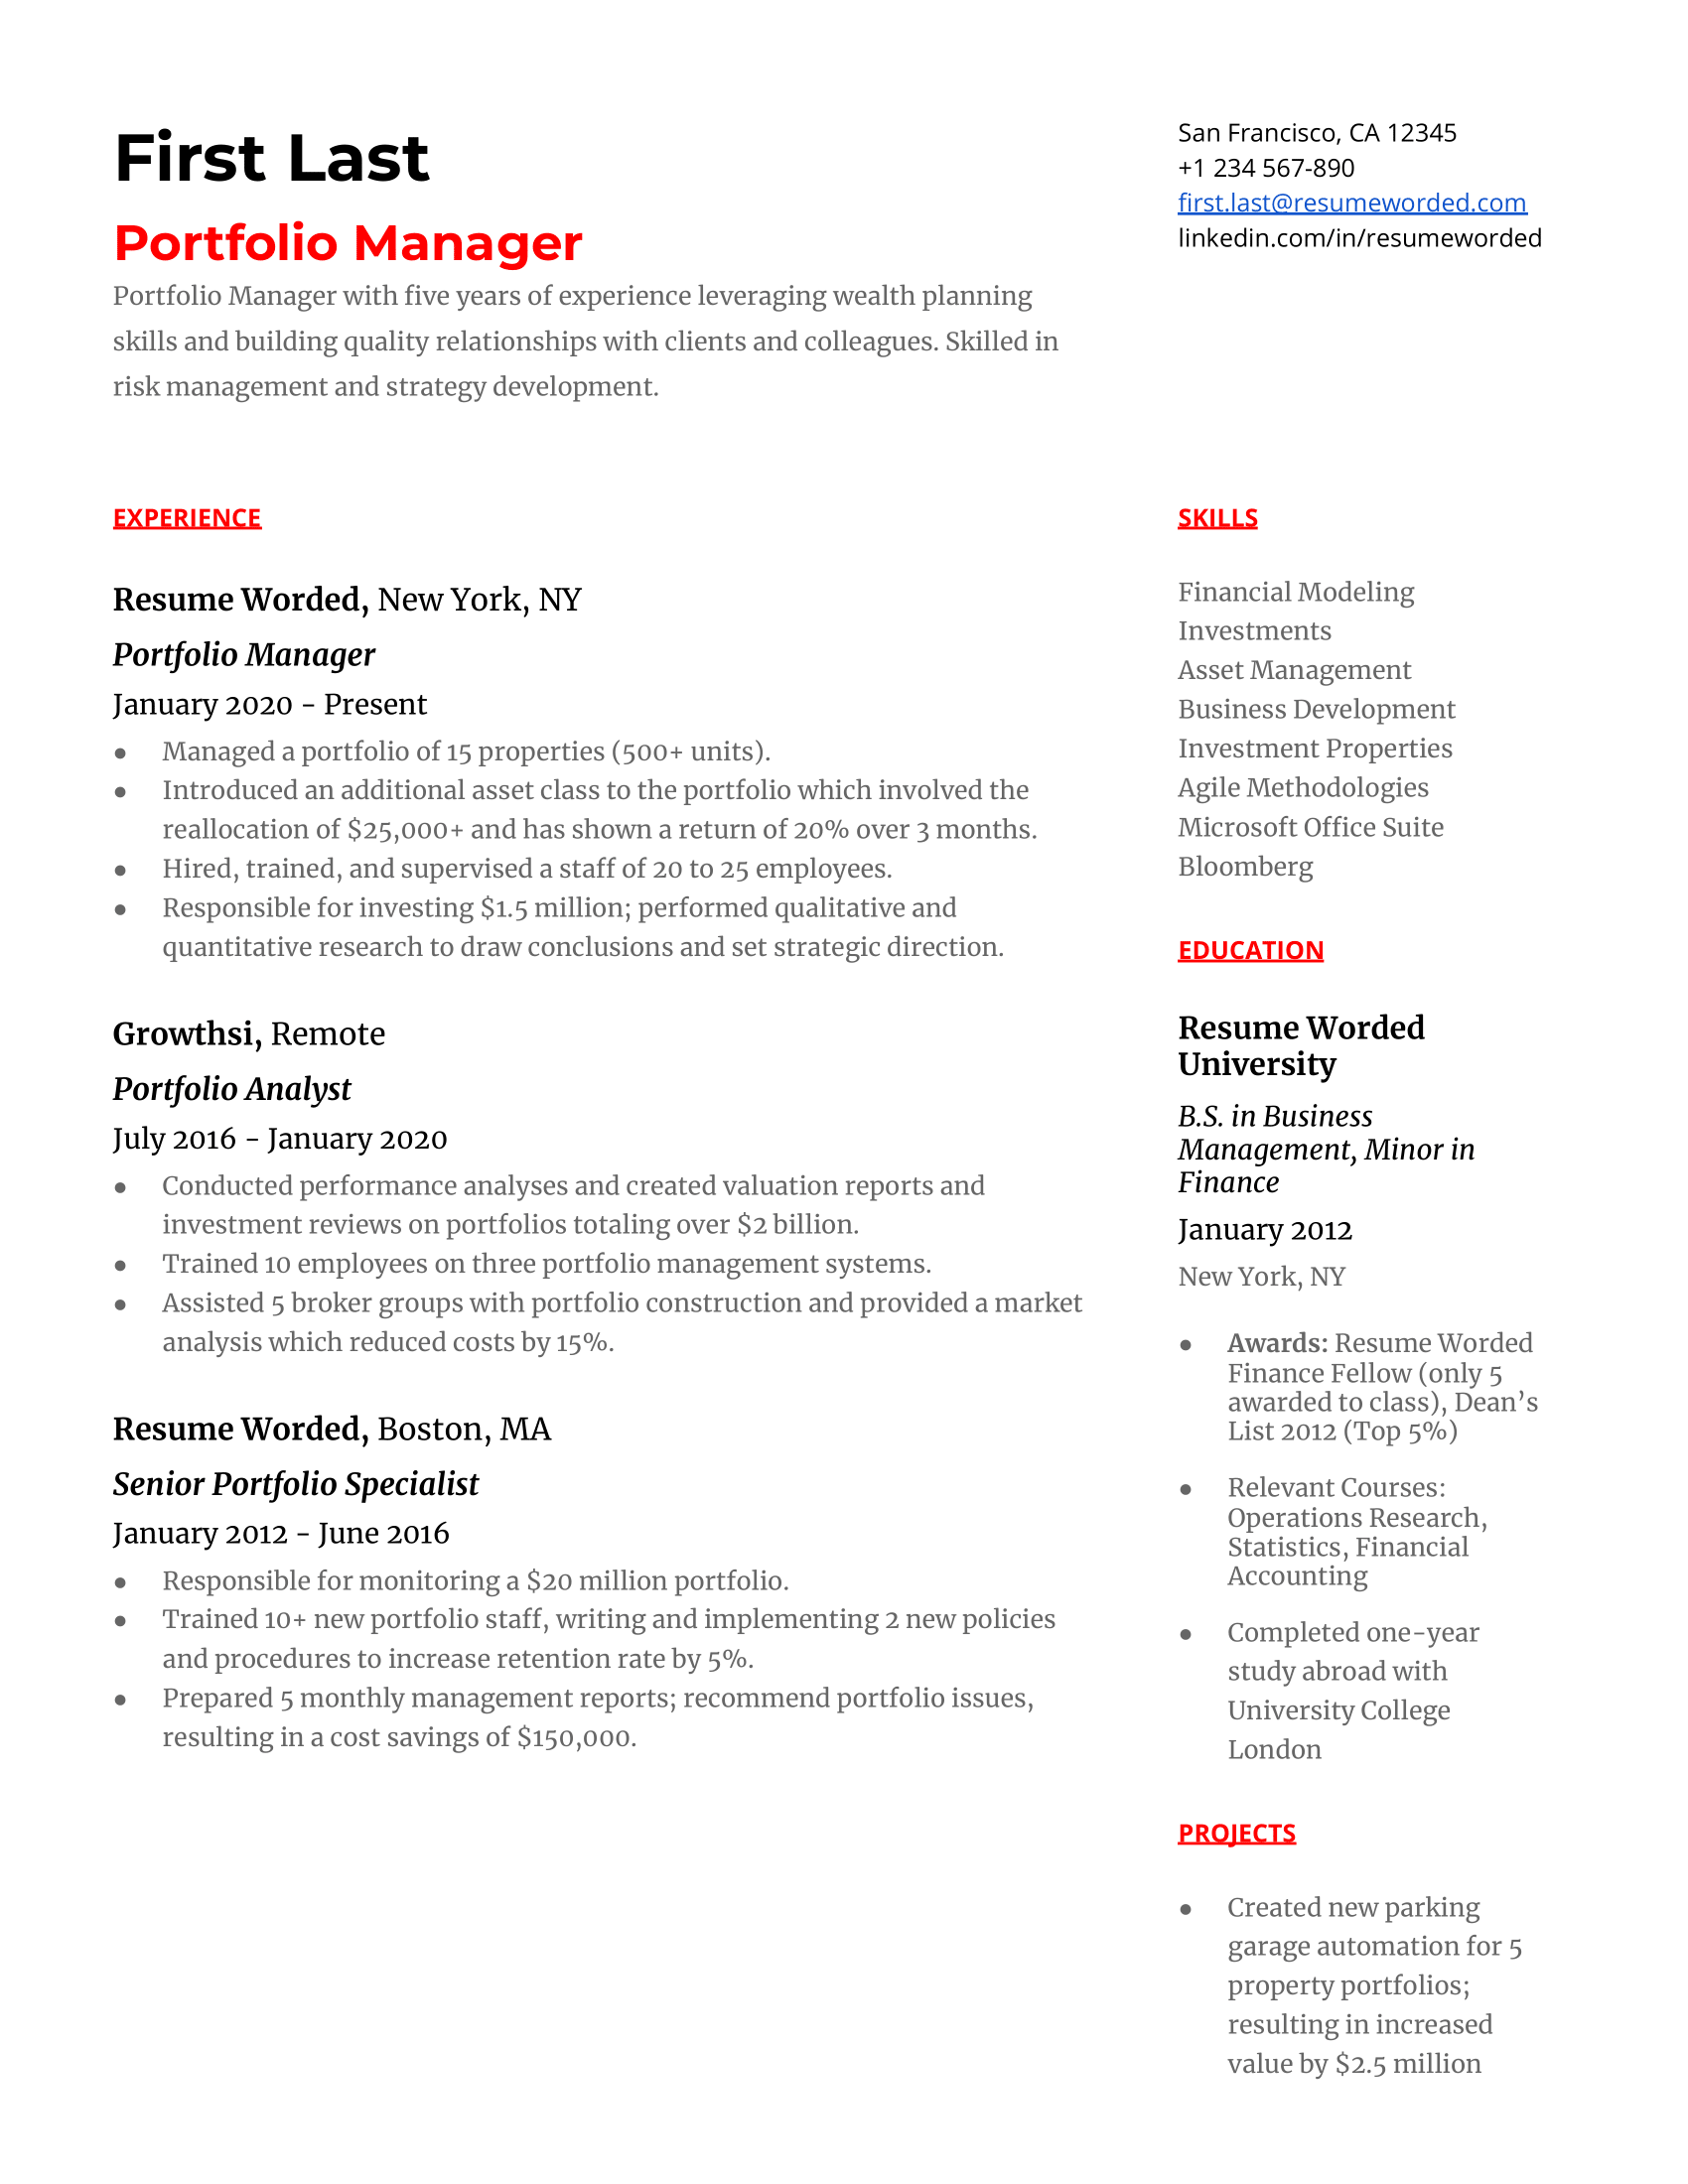 Portfolio manager resume with hard skills in skills section and strong action verbs